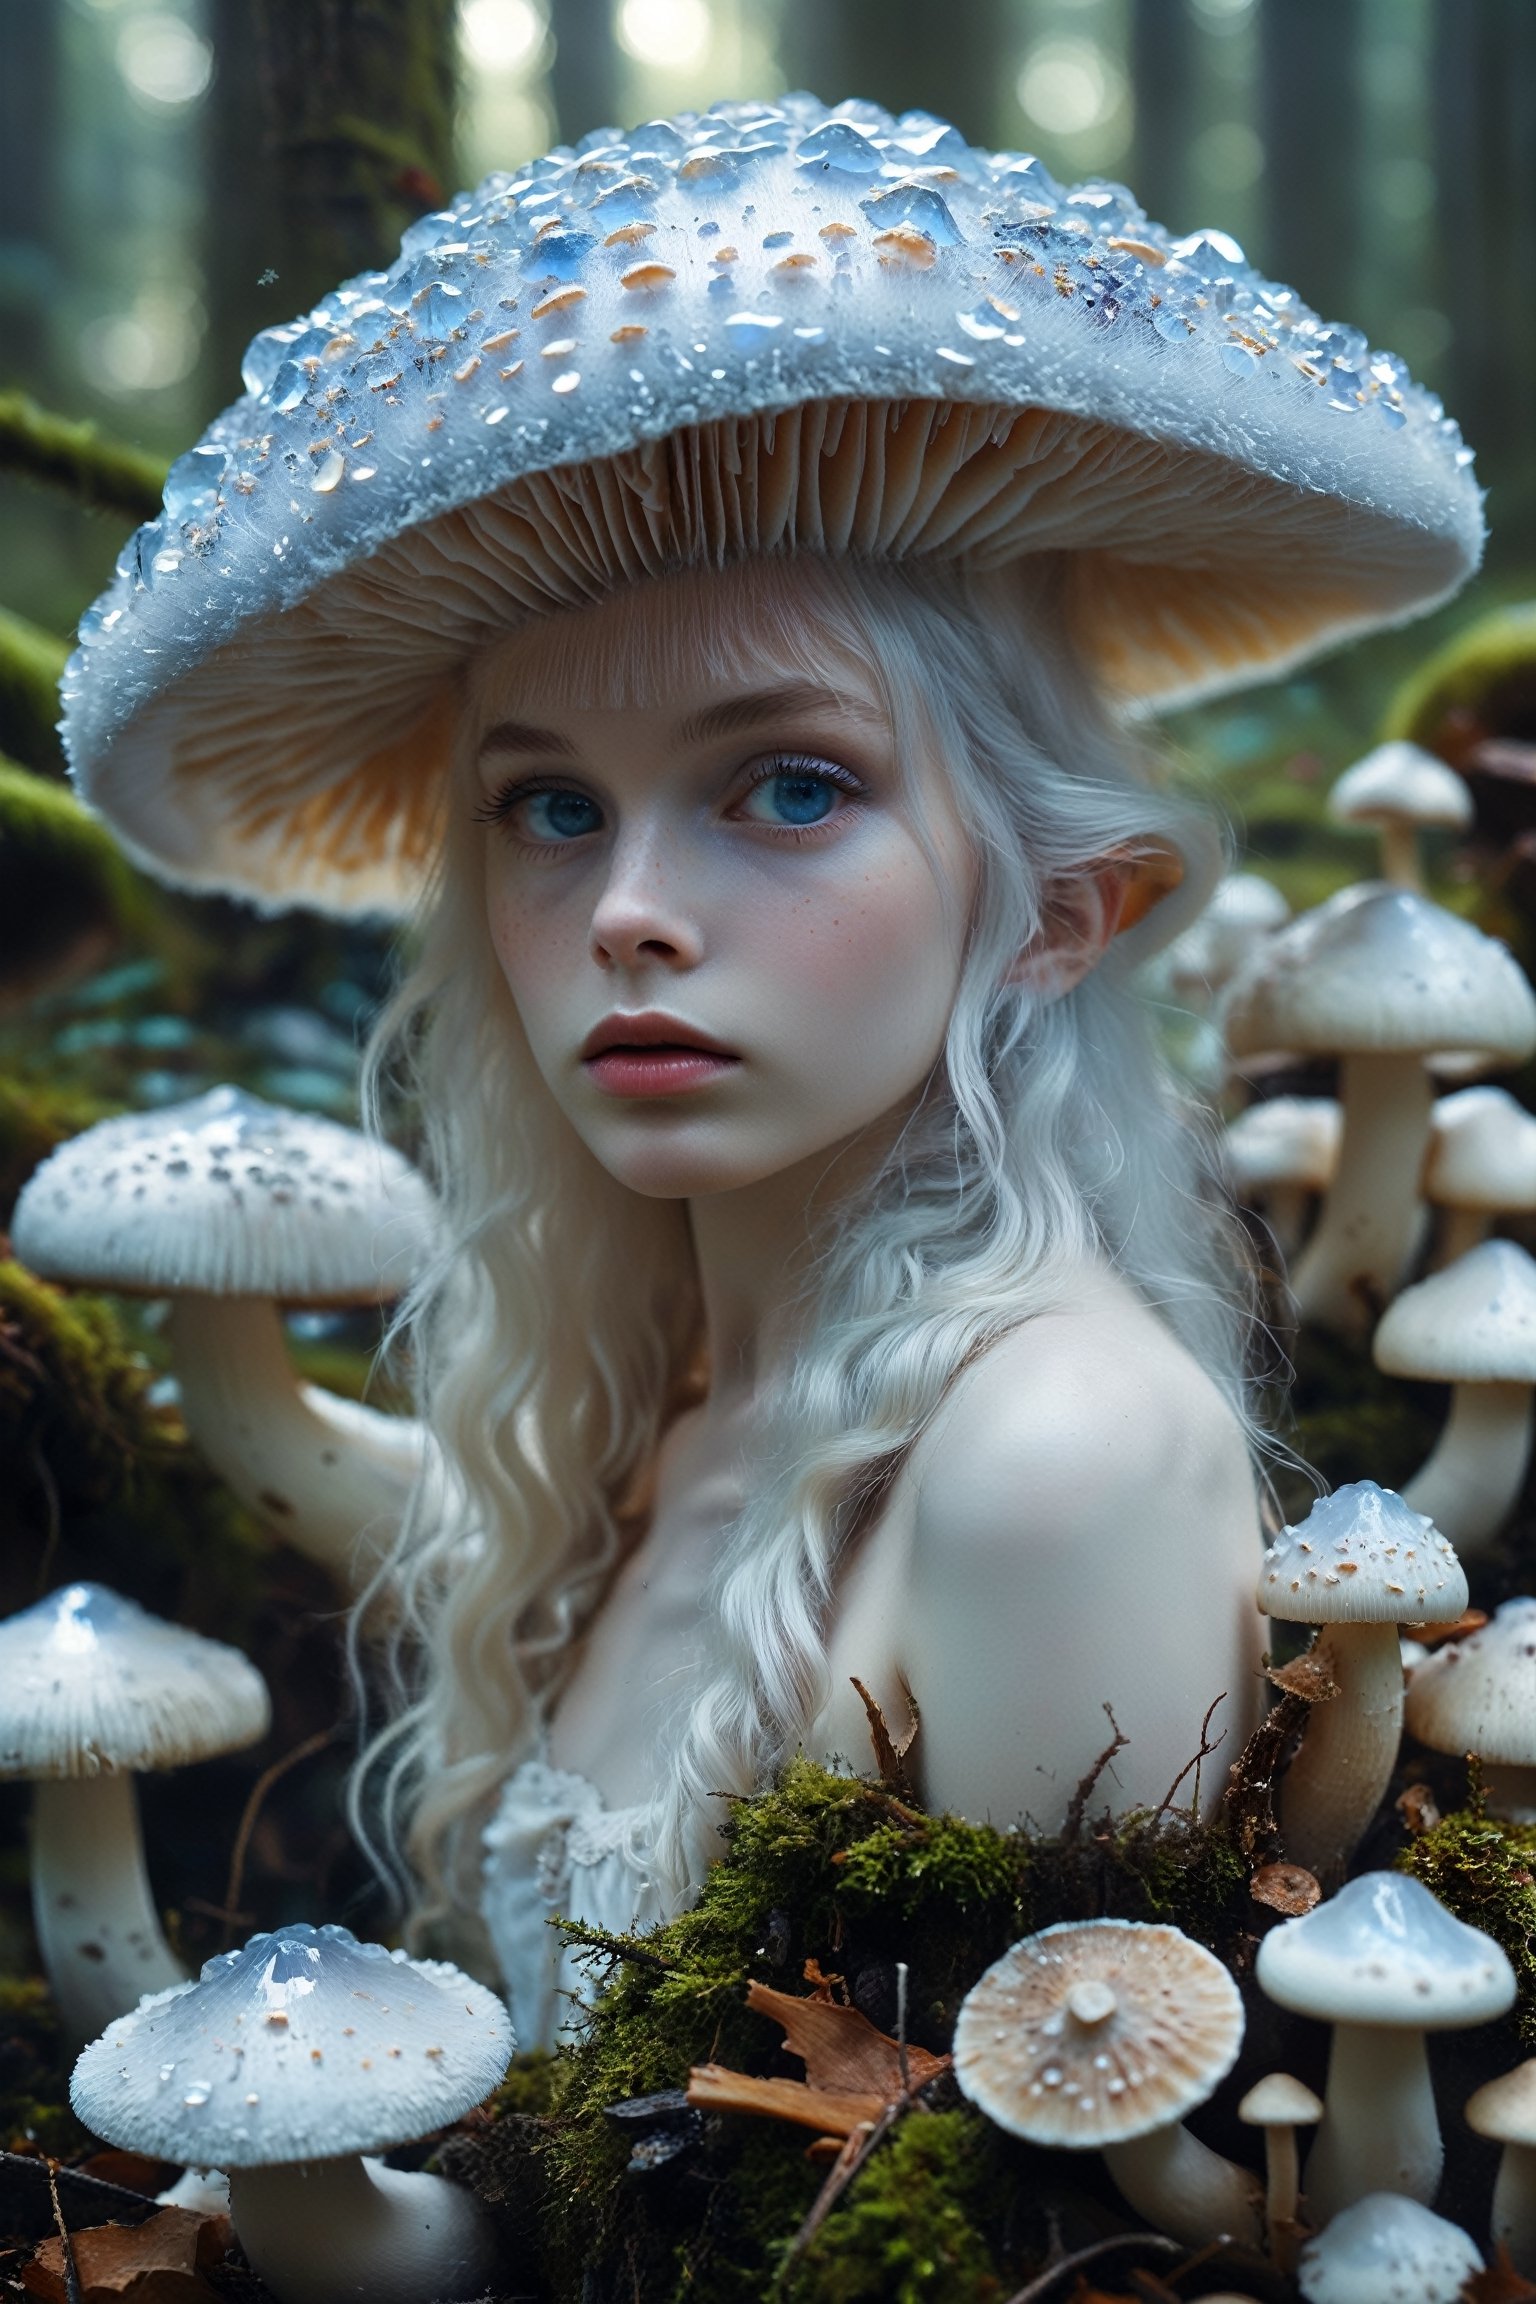 albino mushroom girl, mushroom Head,((Mushrooms made of gemstones)), drill hair,
stands amidst the tranquility,Adorned with soft, pale-colored petals resembling mushroom caps and delicate mycelium cascading from her hair, she exudes ethereal beauty.,Her eyes silver or pale blue, convey mystery and wonder as she moves gracefully through the enchanted landscape, Surrounded by vibrant colors and playful woodland creatures, she embodies the magic and wonder of nature's hidden treasures.",mushroomz,dal,Amethyst ,Crystal game props,1girl